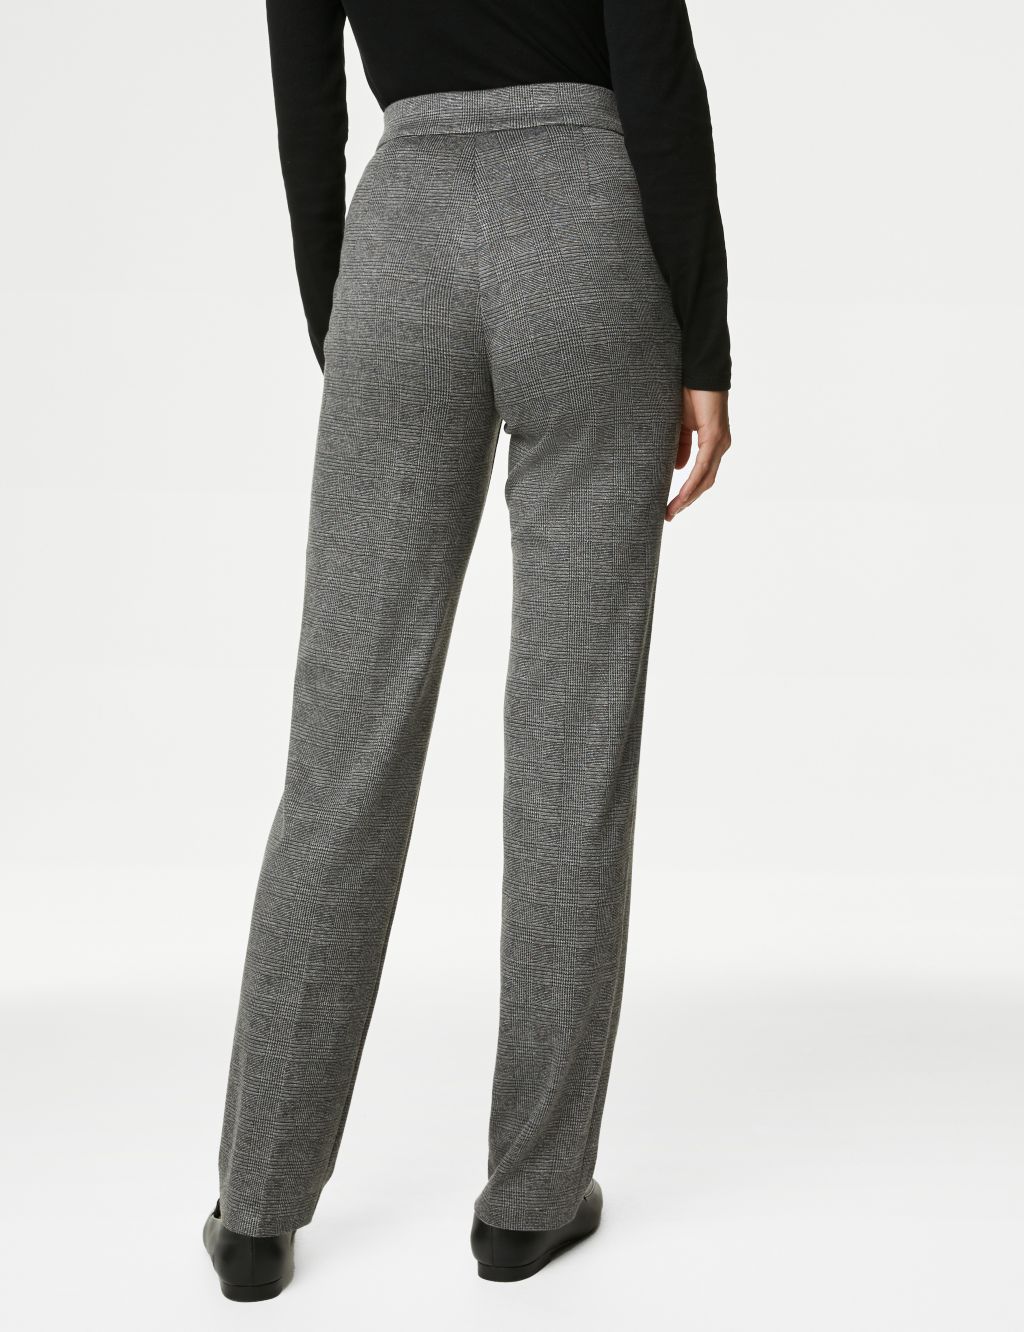 Jersey Checked Straight Leg Trousers image 4